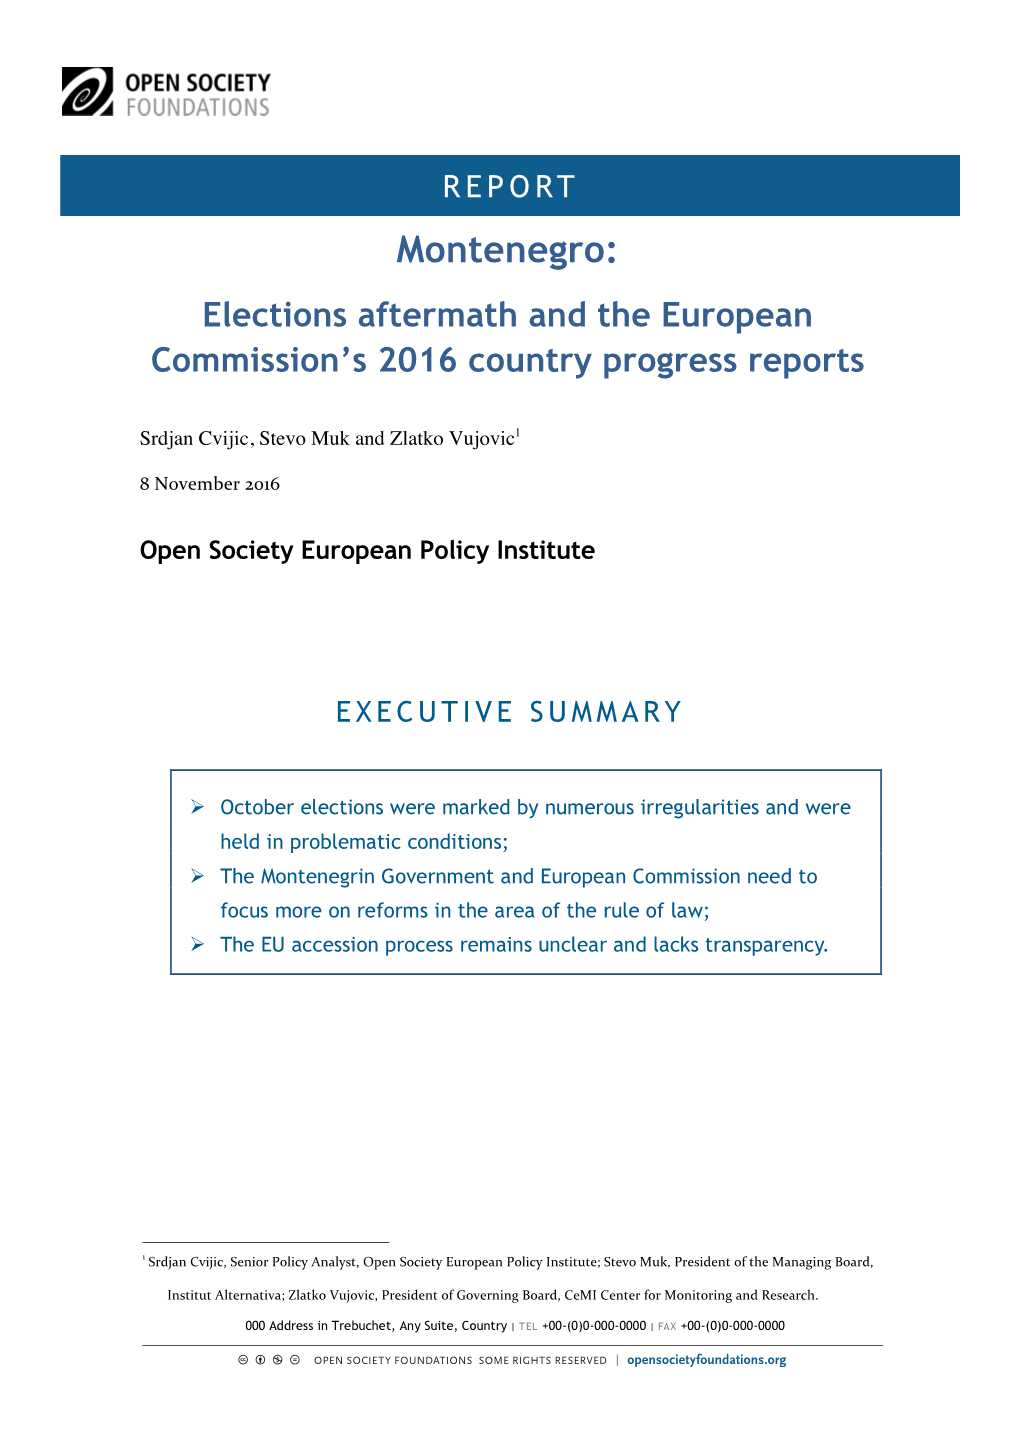 Montenegro: Elections Aftermath and the European Commission’S 2016 Country Progress Reports